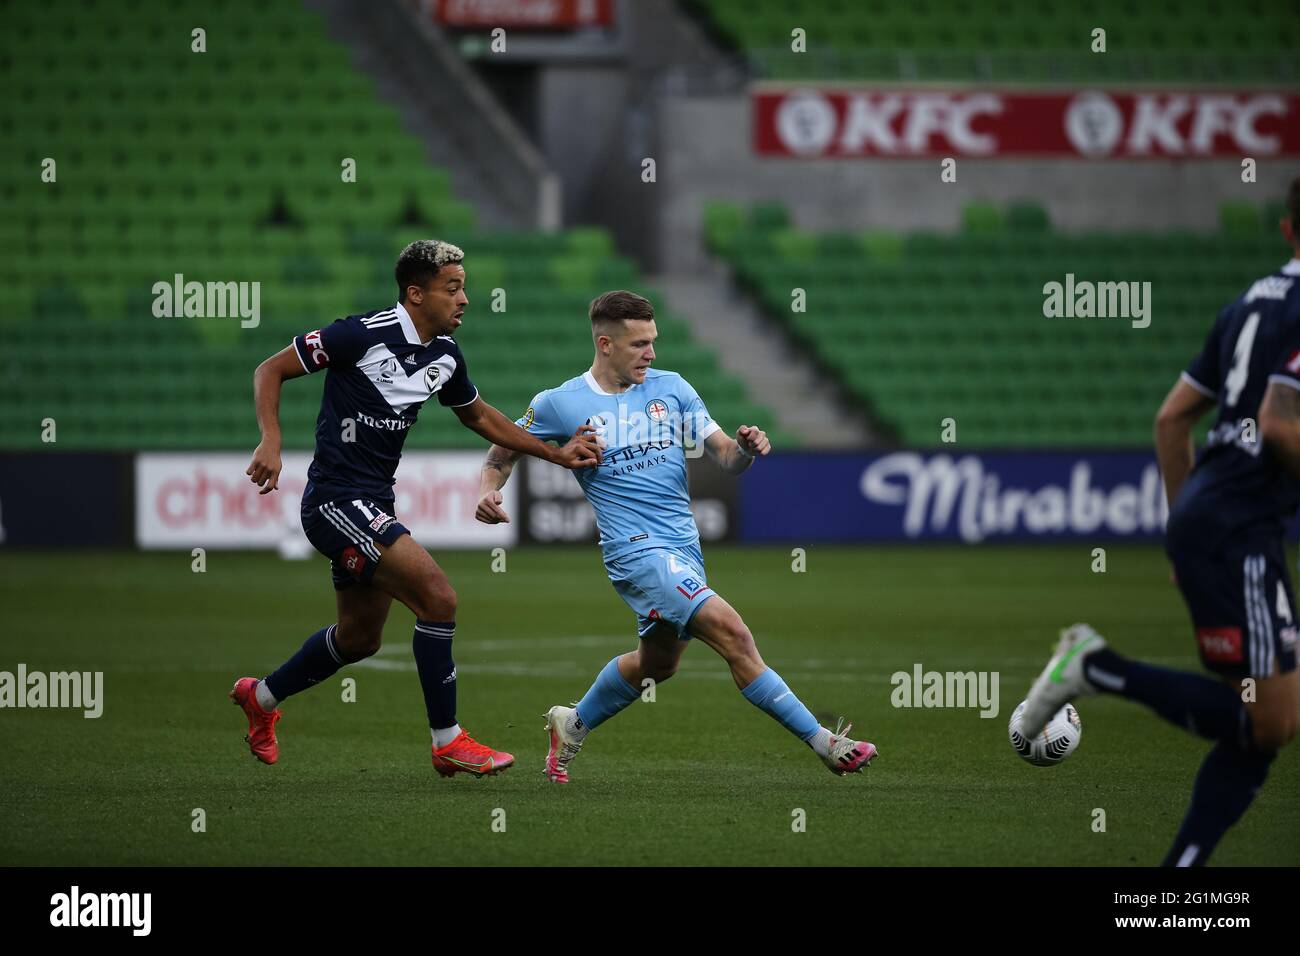 Melbourne, Australia, 6 June, 2021. Scott Galloway of Melbourne City kicks the ball during Round 24 of the Melbourne Victory v Melbourne City FC A-League match, Australia. Credit: Dave Hewison/Alamy Live News Stock Photo